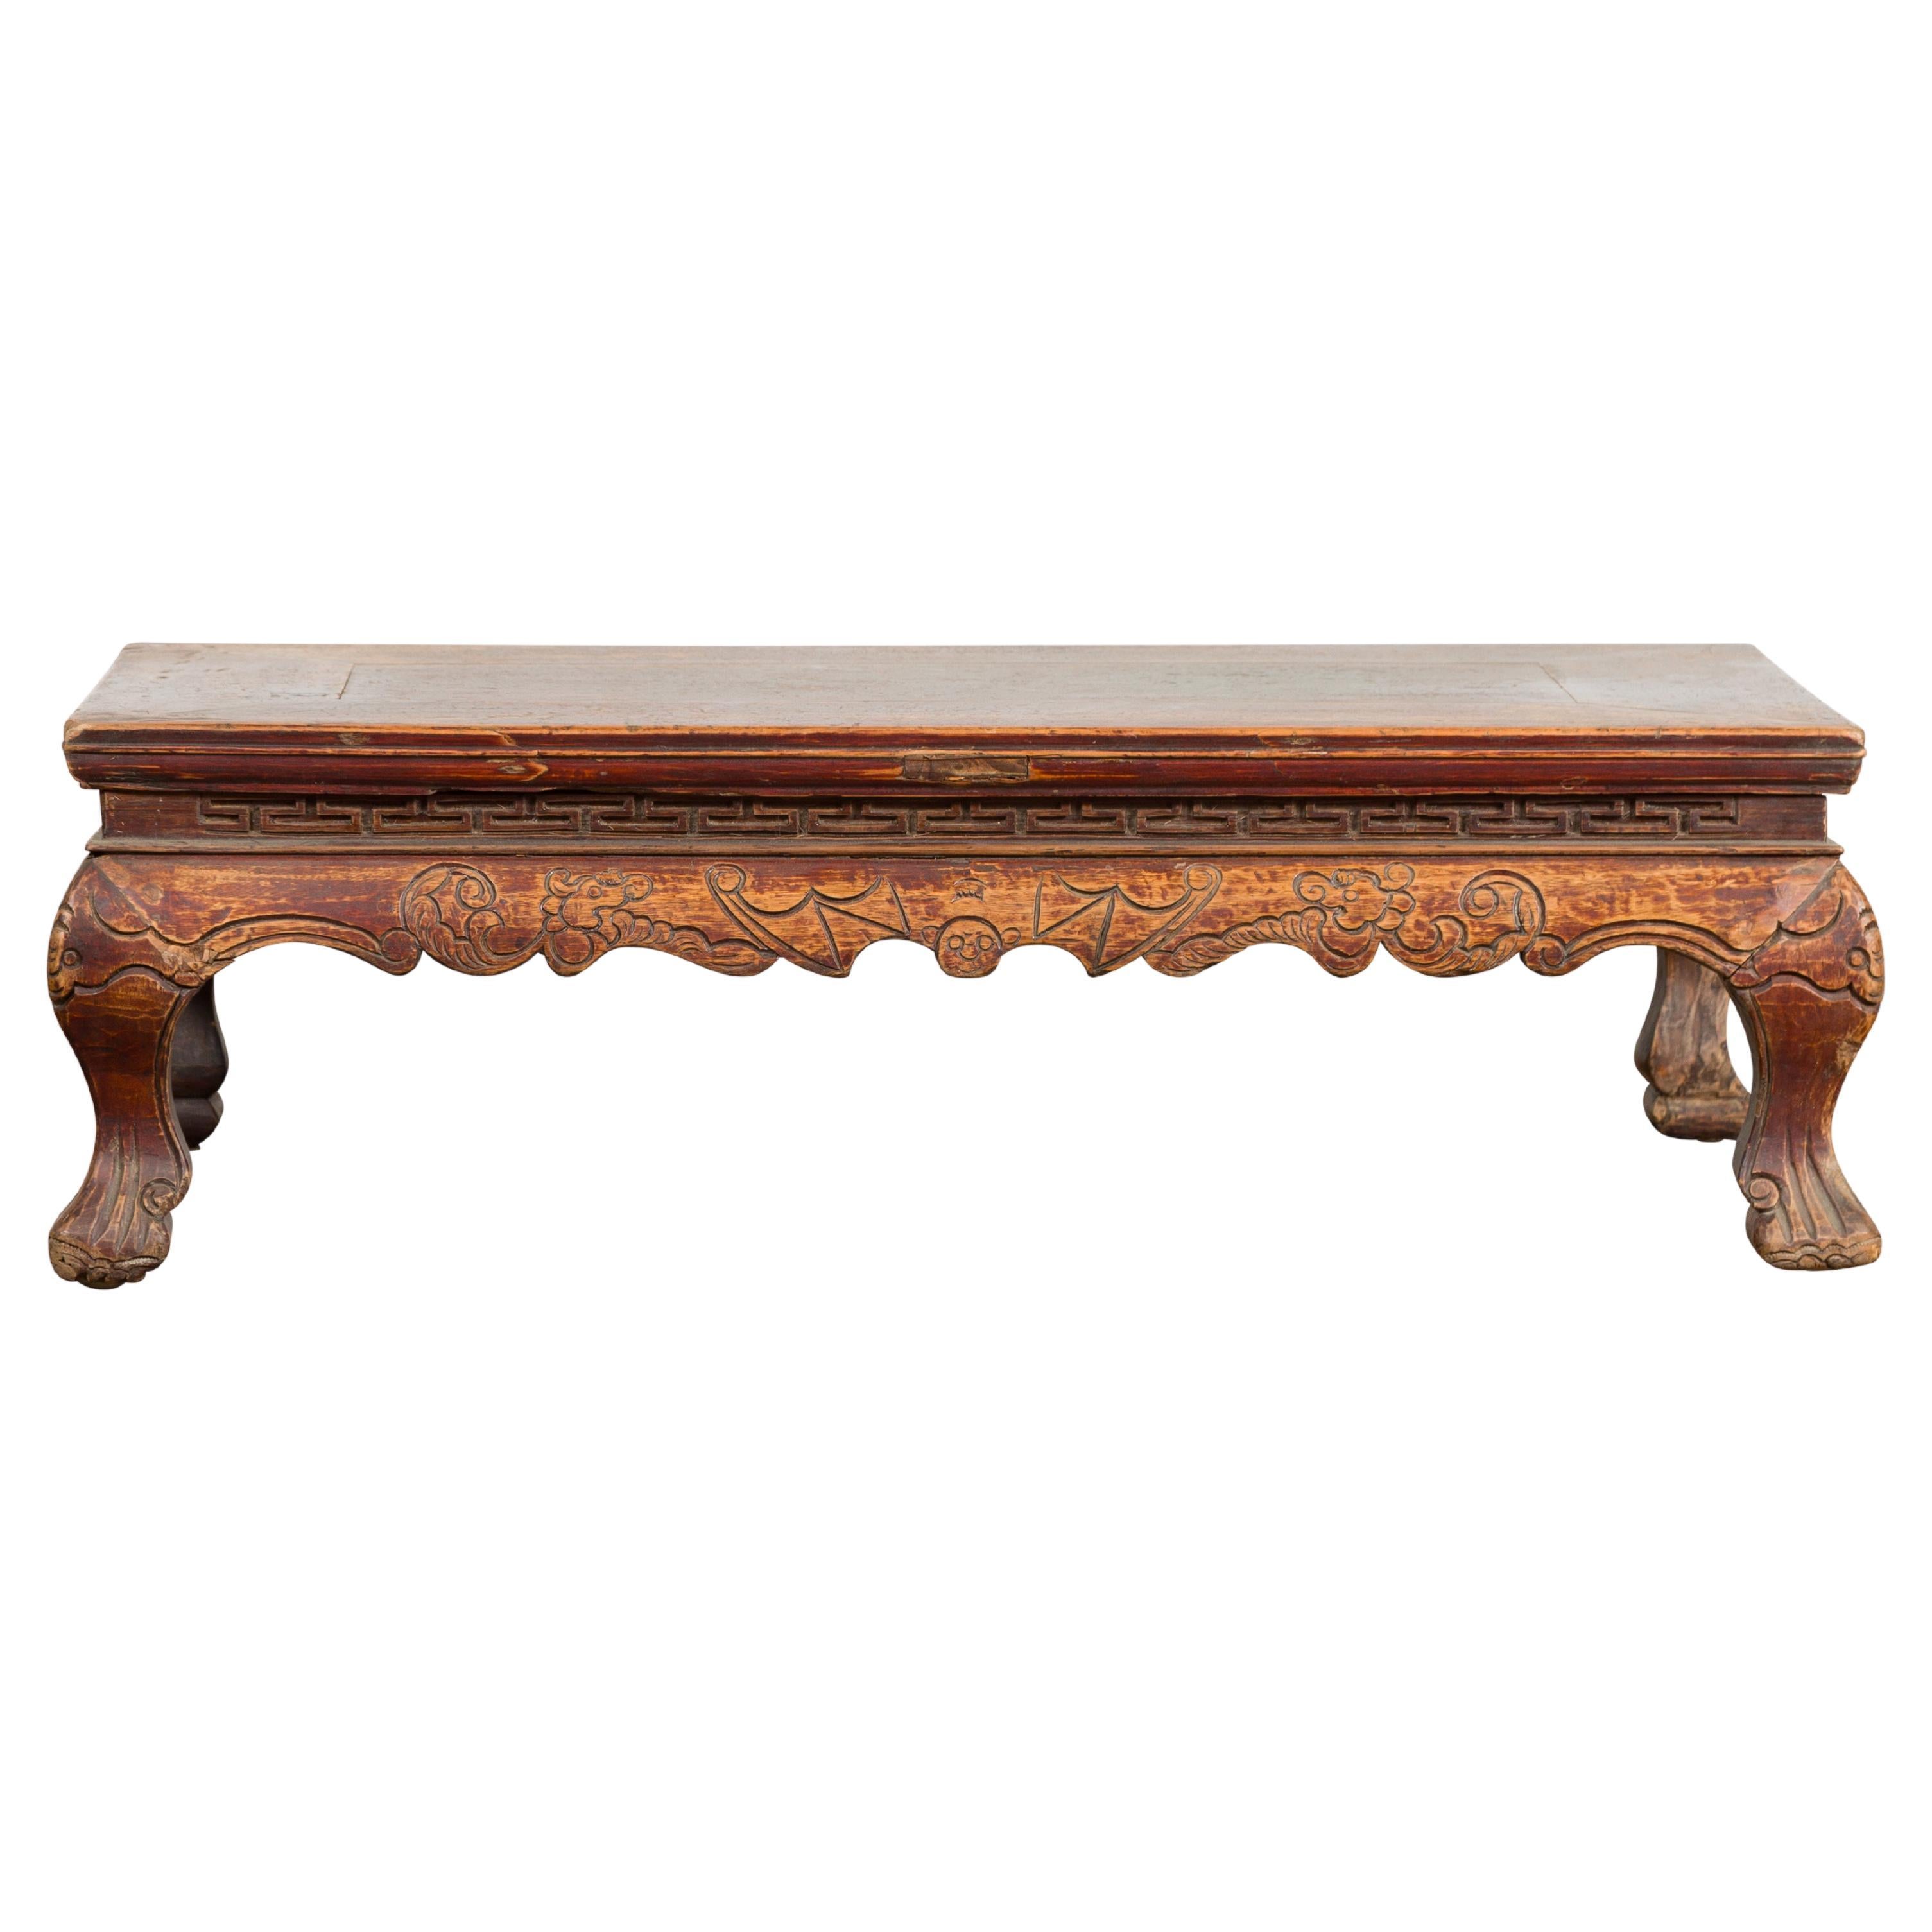 Chinese Qing Dynasty Period Low Kang Table with Carved Bats and Cabriole Legs For Sale